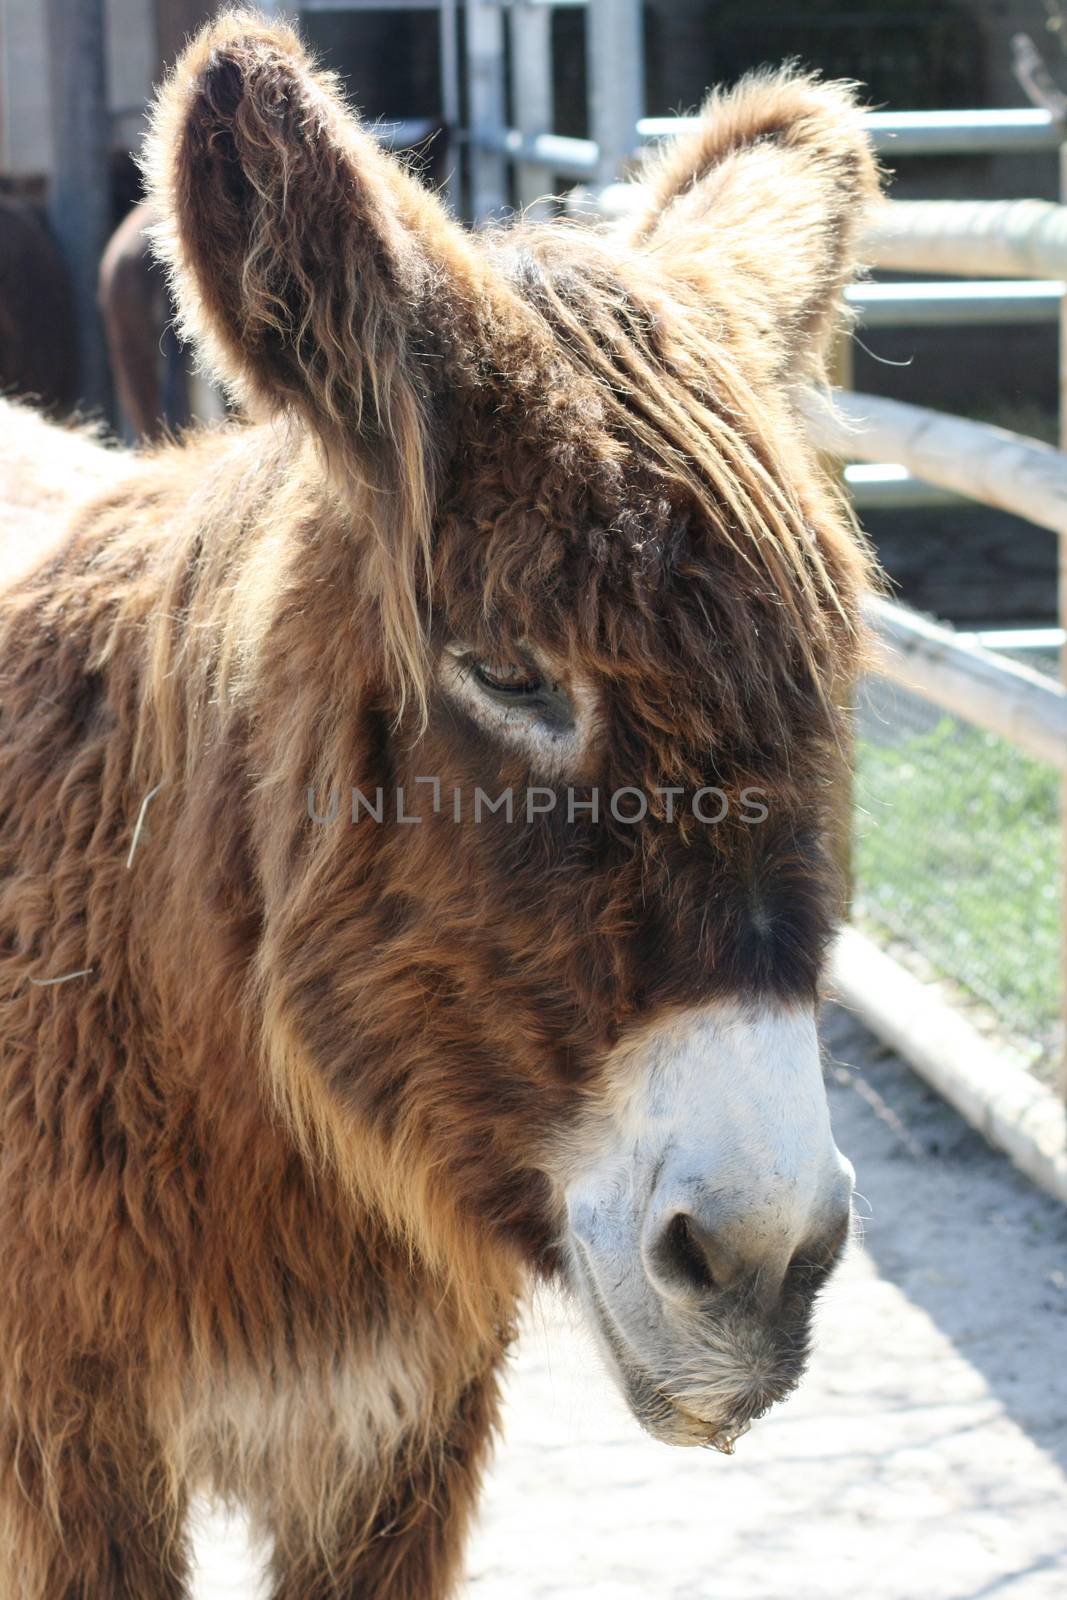 Portrait shot of a brown donkey with a white mouth